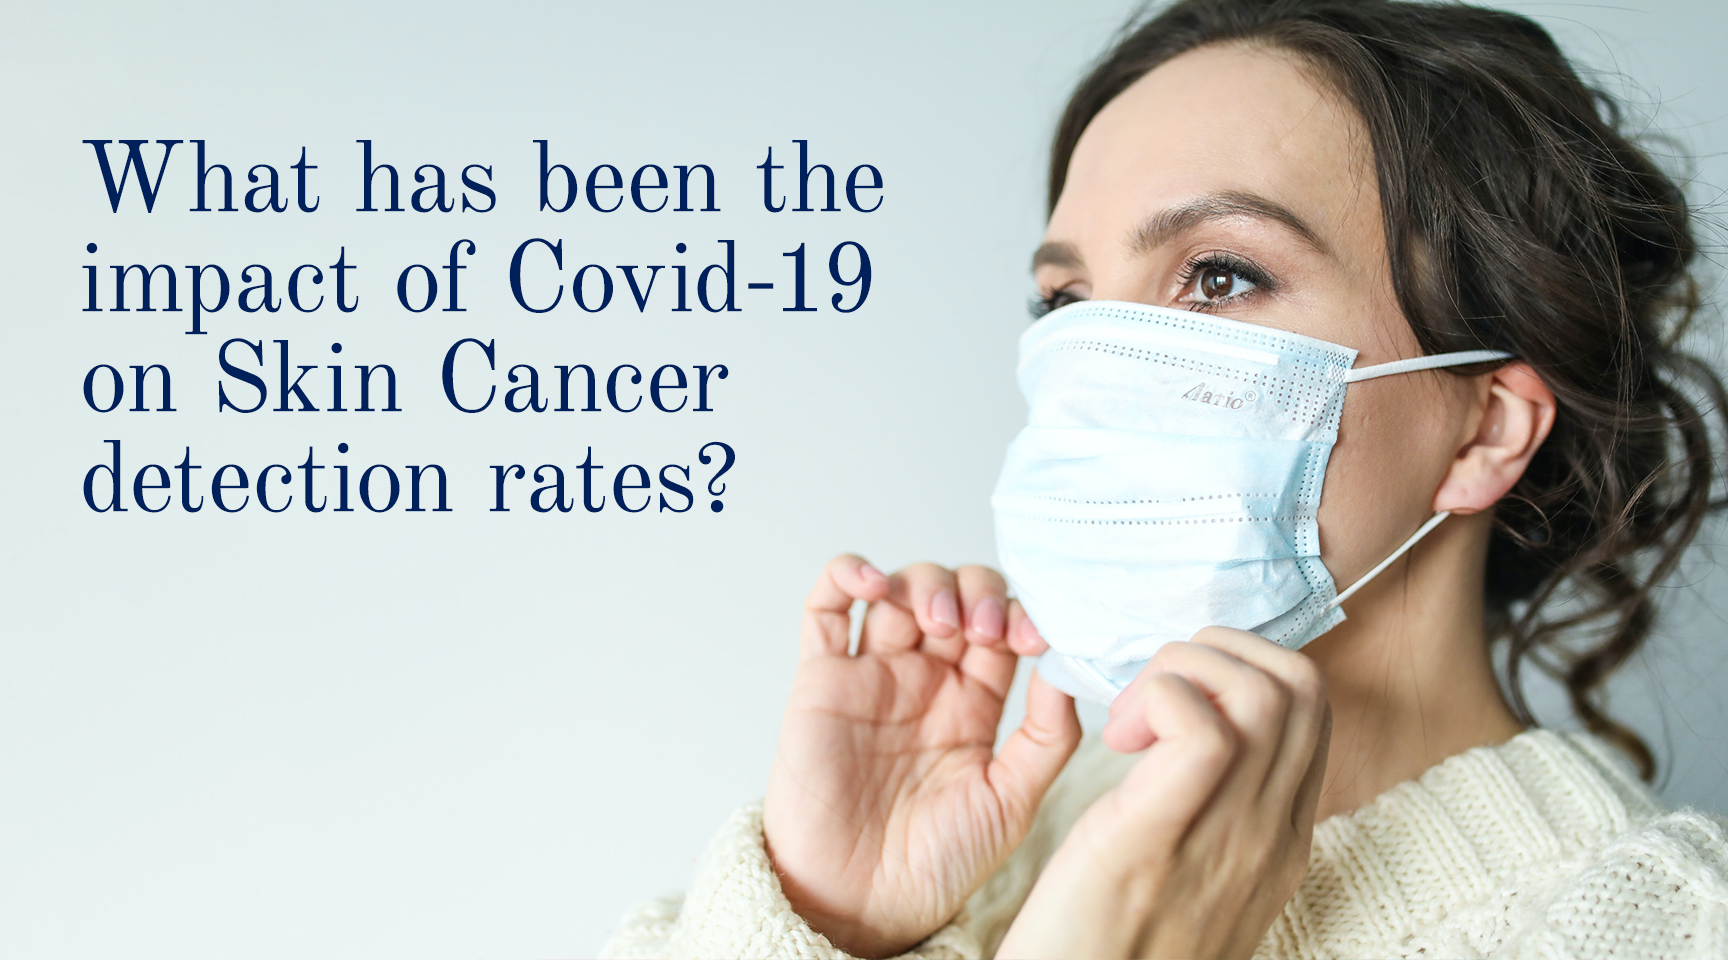 What has been the impact of Covid-19 on Skin Cancer detection rates?